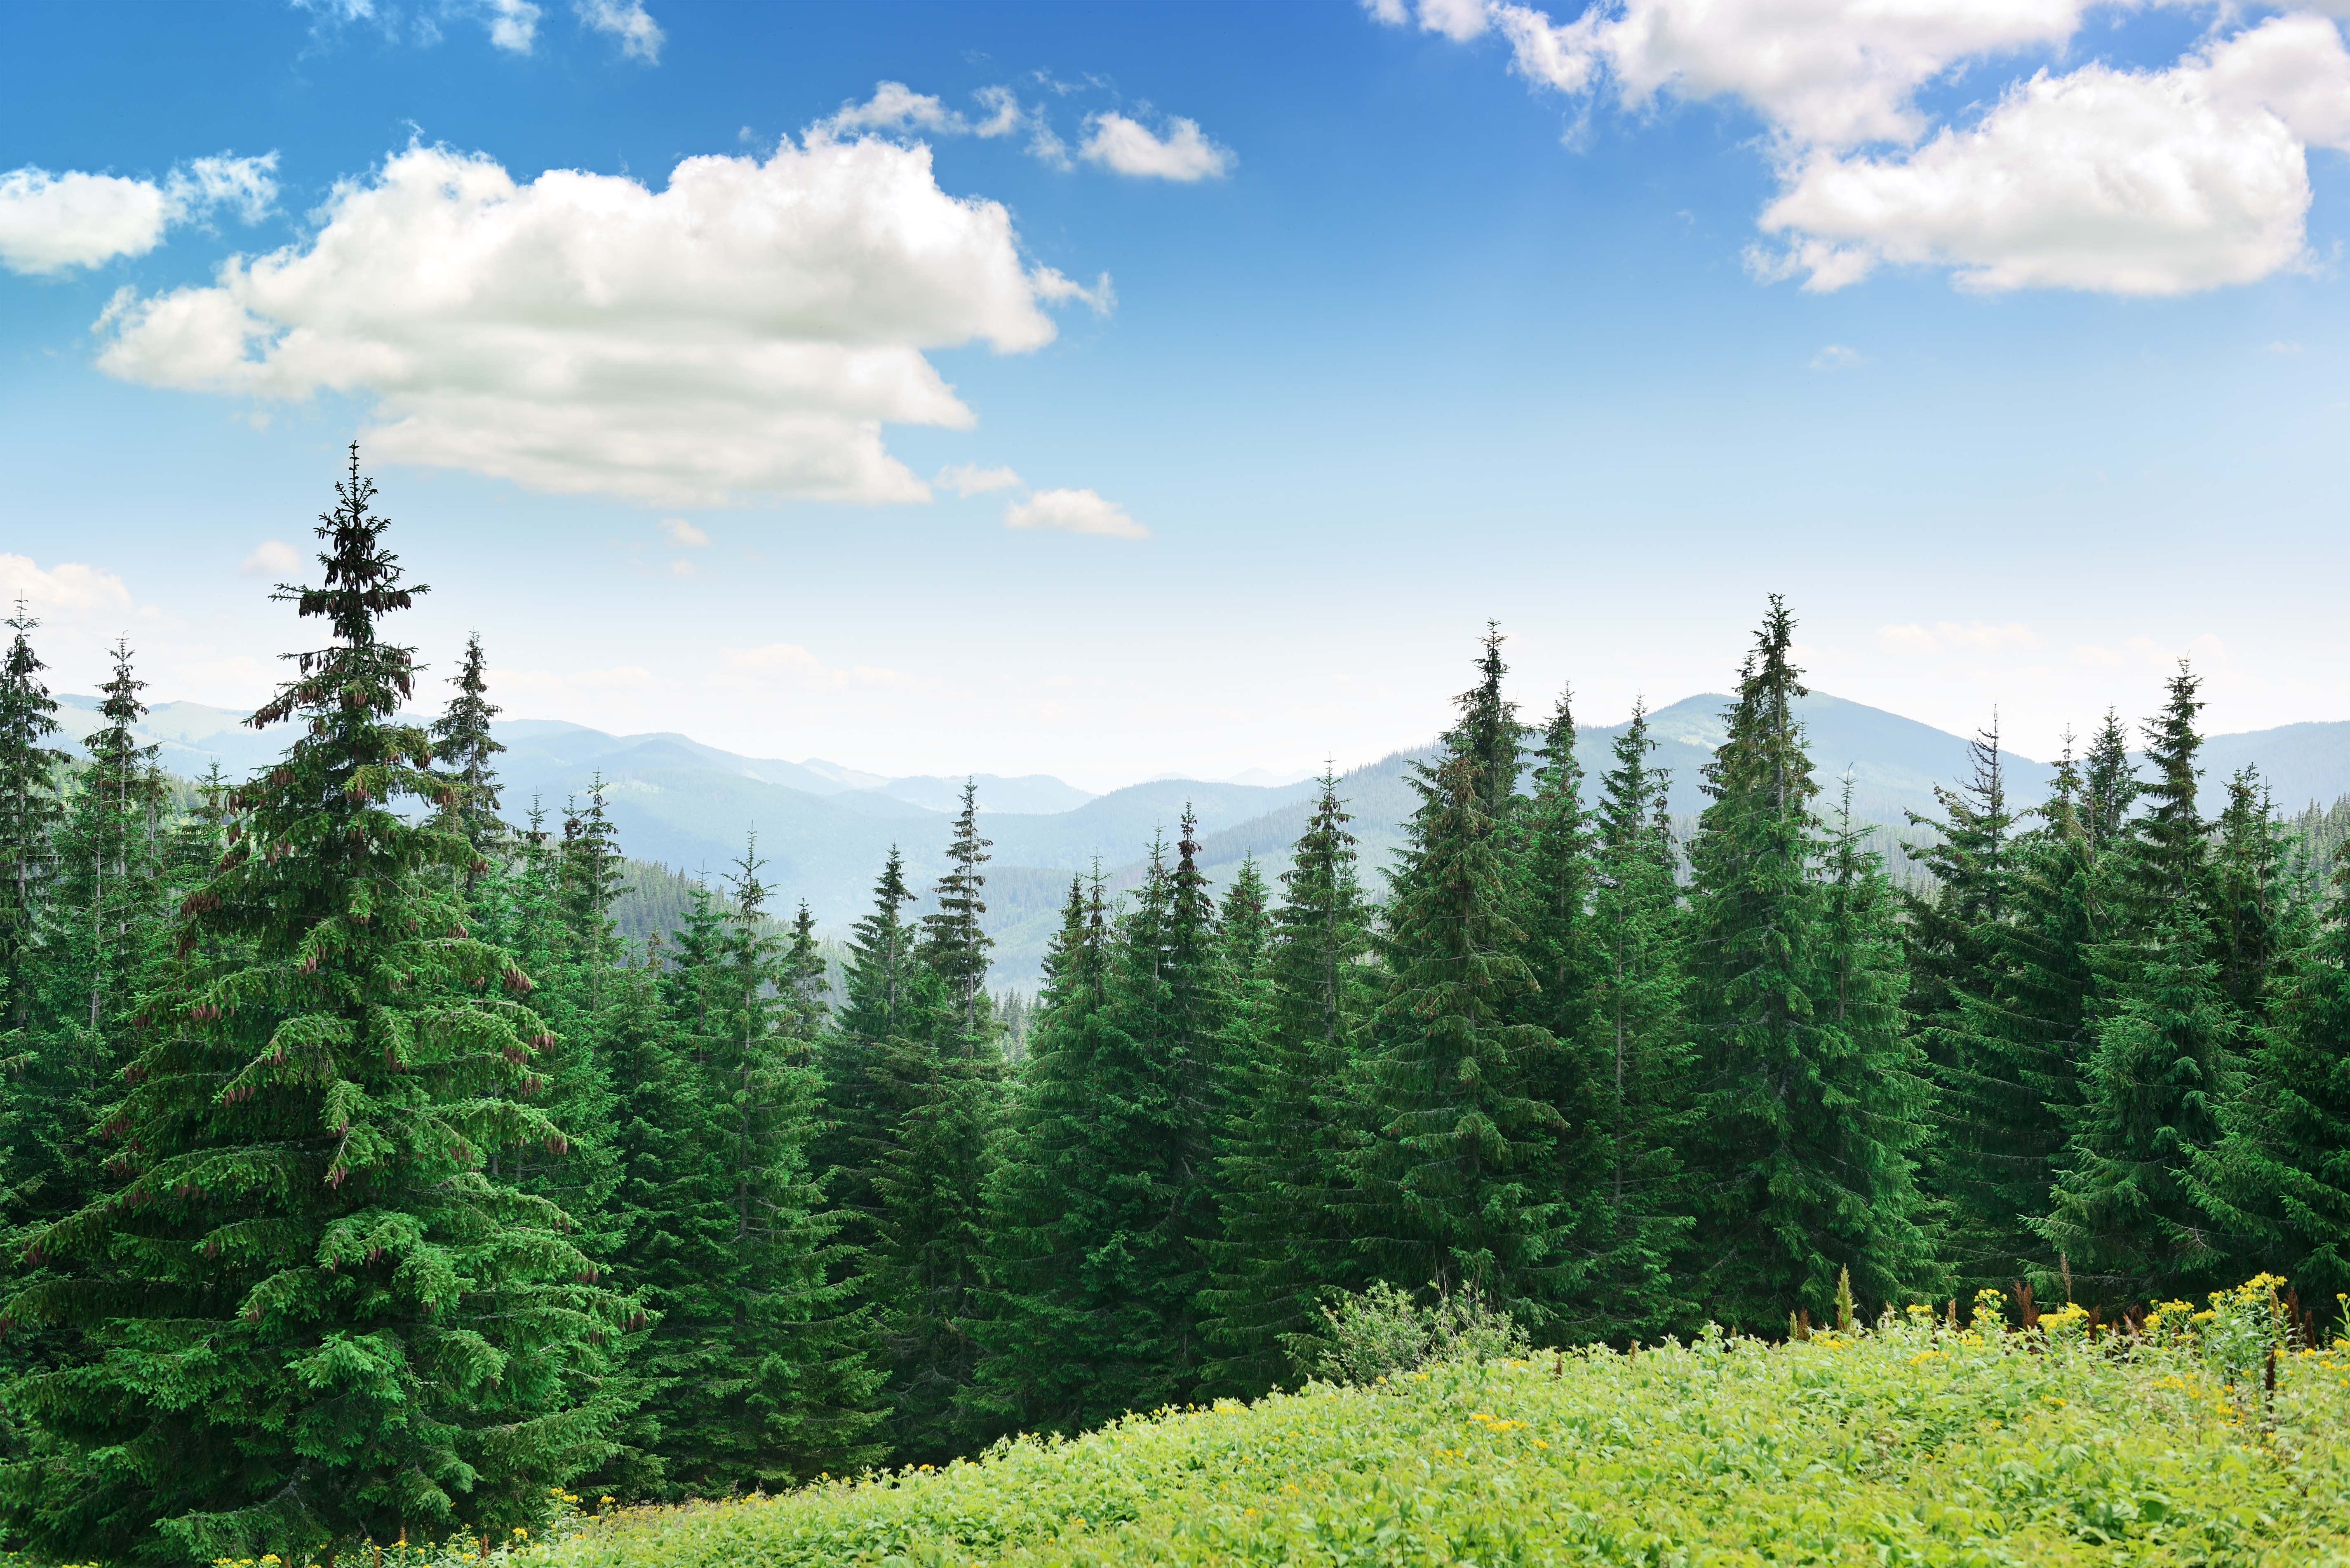 Beautiful pine trees on background high mountains